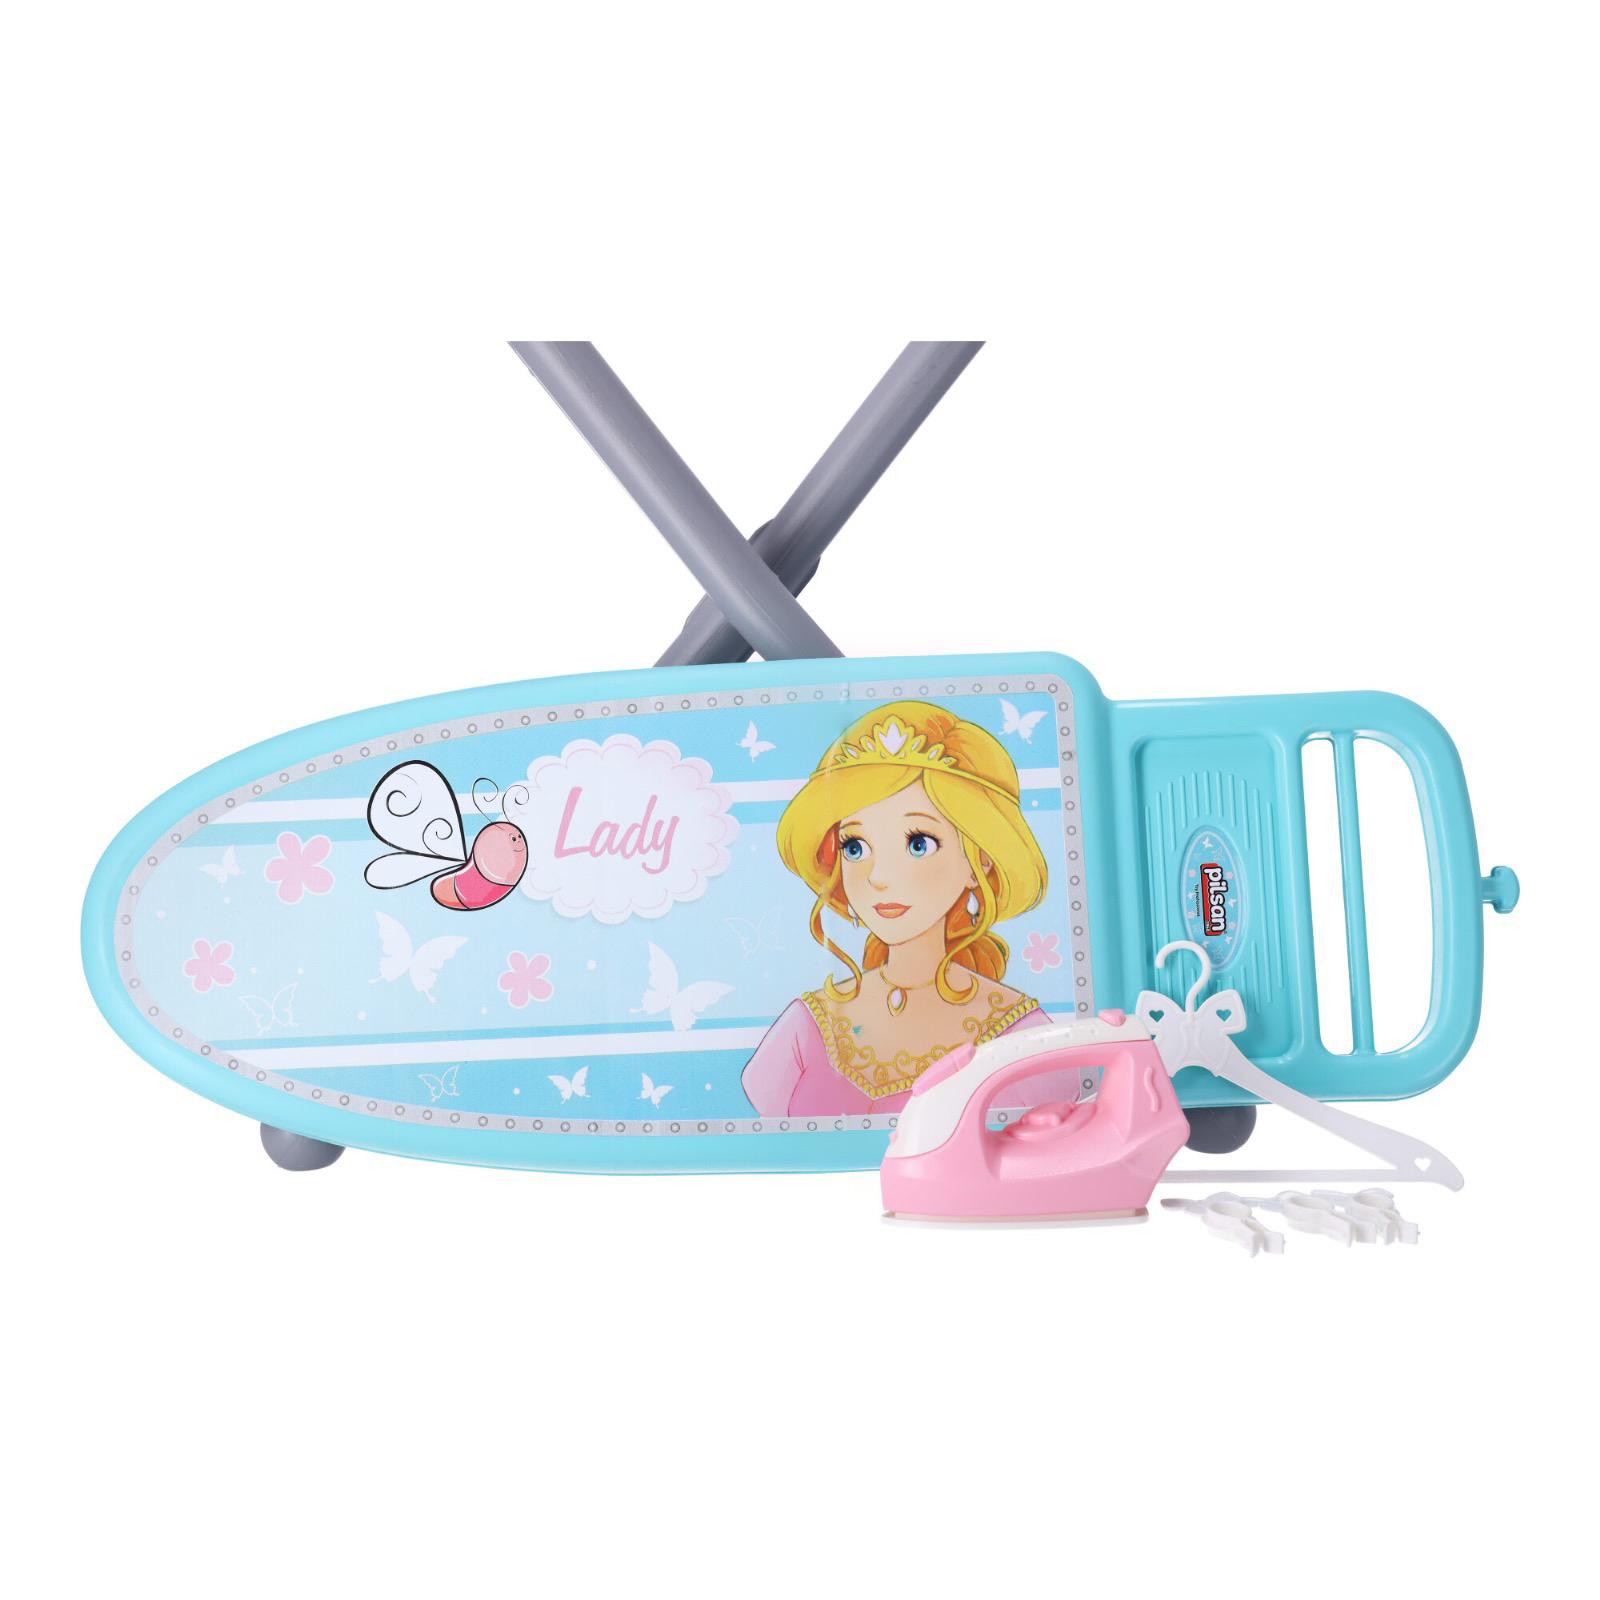 Ironing board with clothes hanger - a child's toy Pilsan